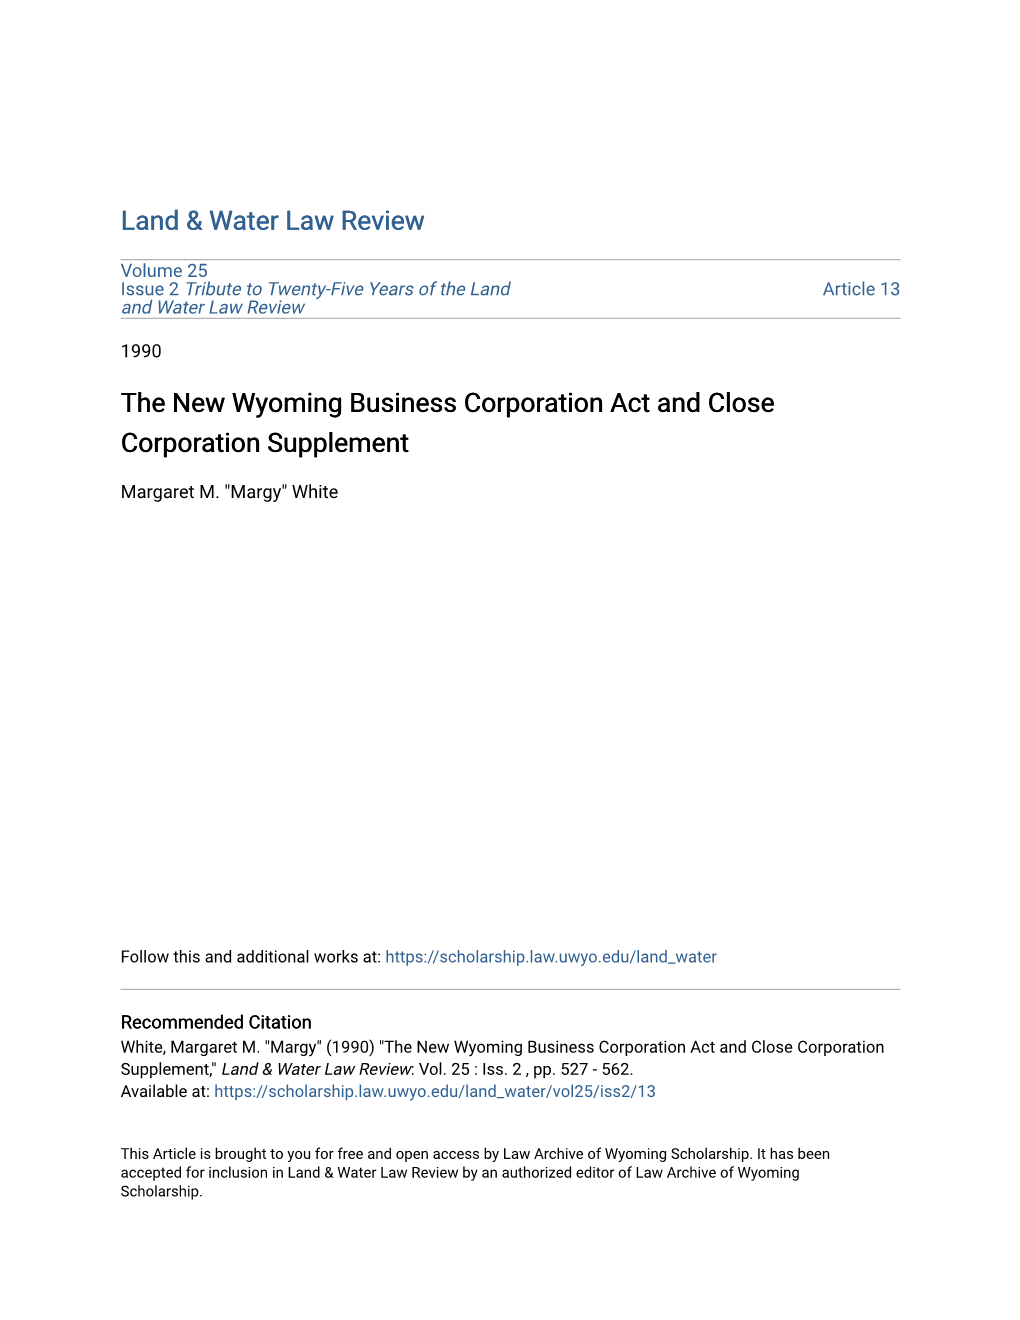 The New Wyoming Business Corporation Act and Close Corporation Supplement